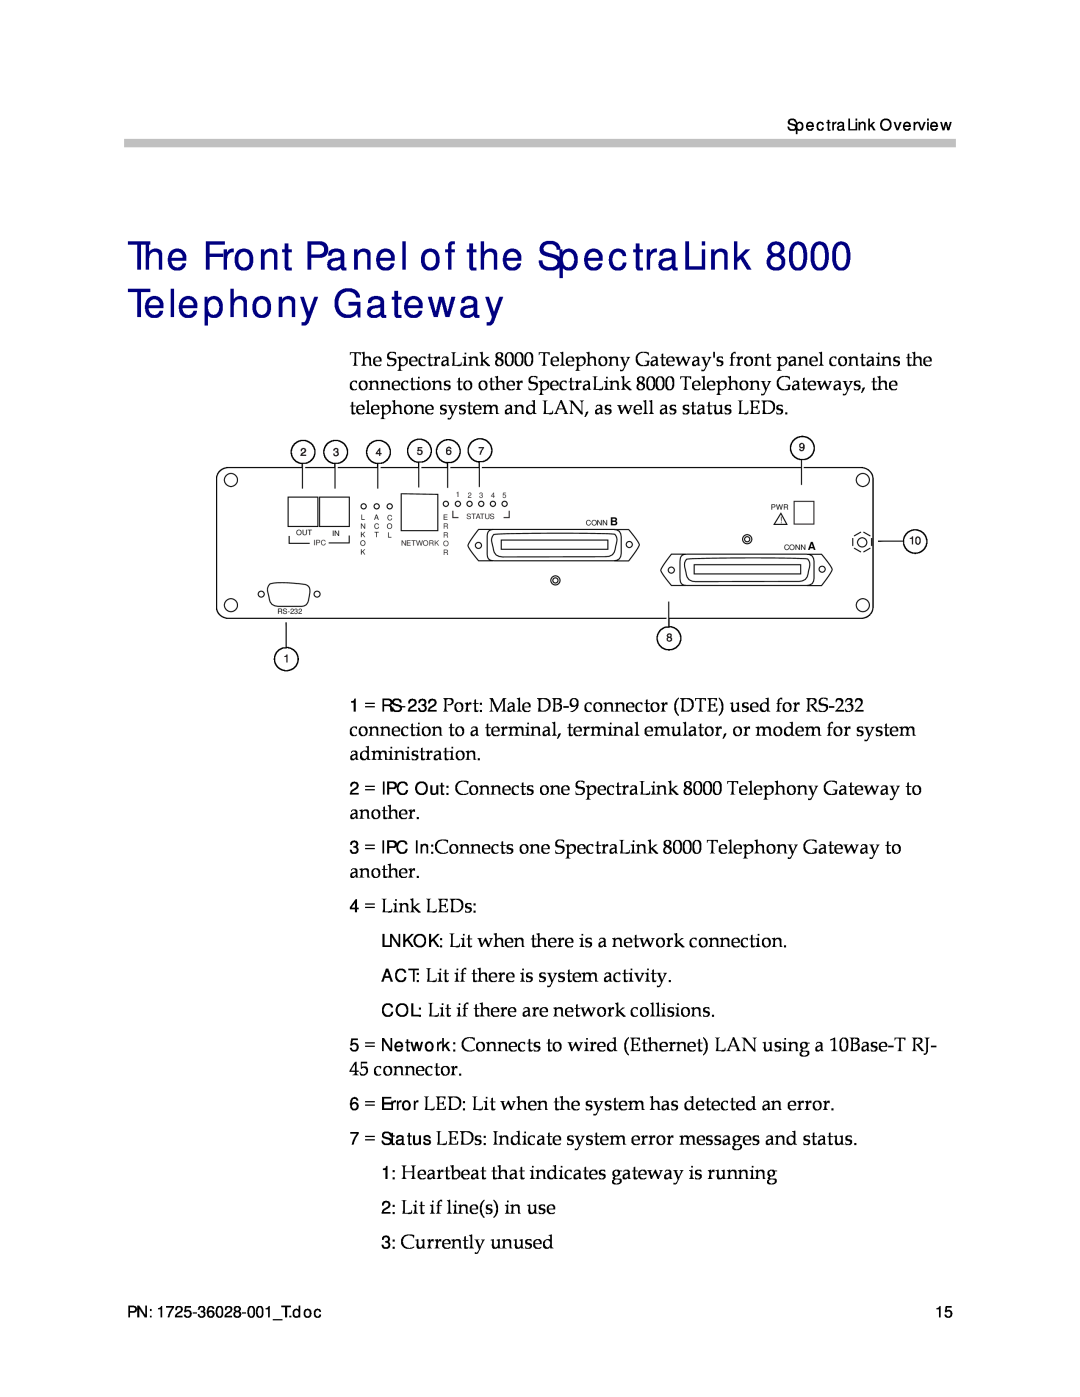 Polycom 1725-36028-001 manual The Front Panel of the SpectraLink 8000 Telephony Gateway 